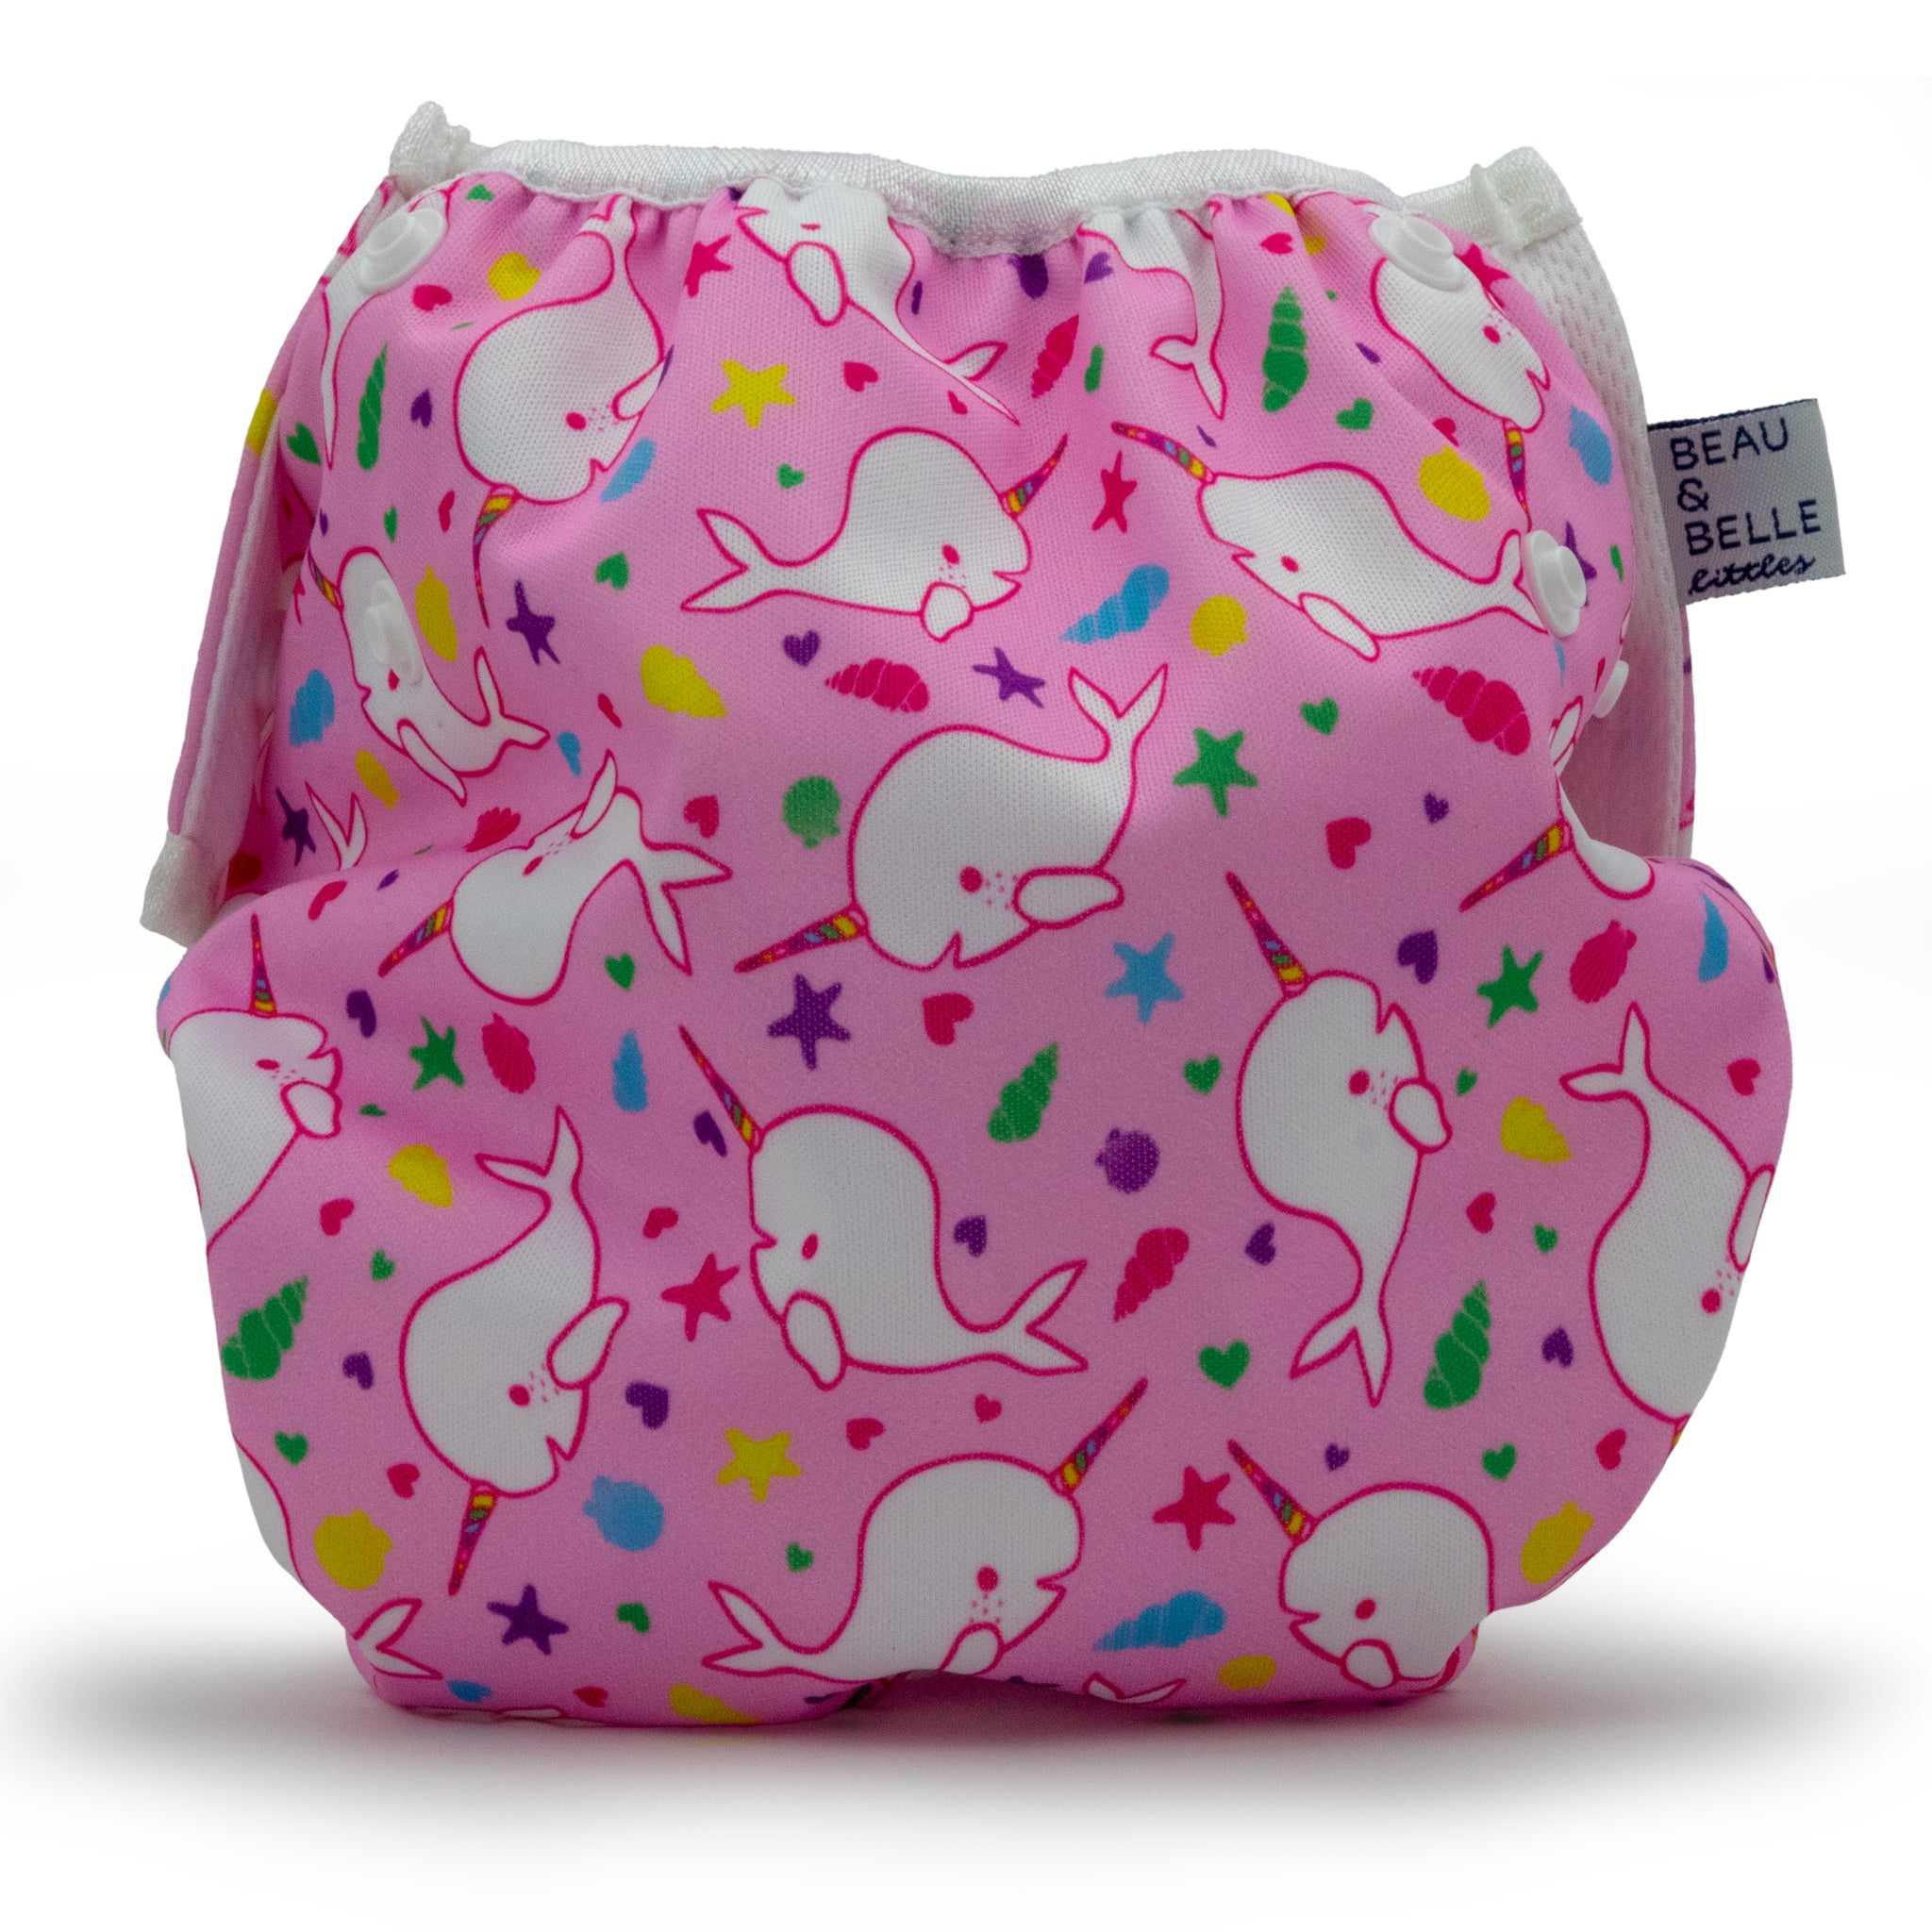 Reusable swim diaper with pink narhwal design, rear view.